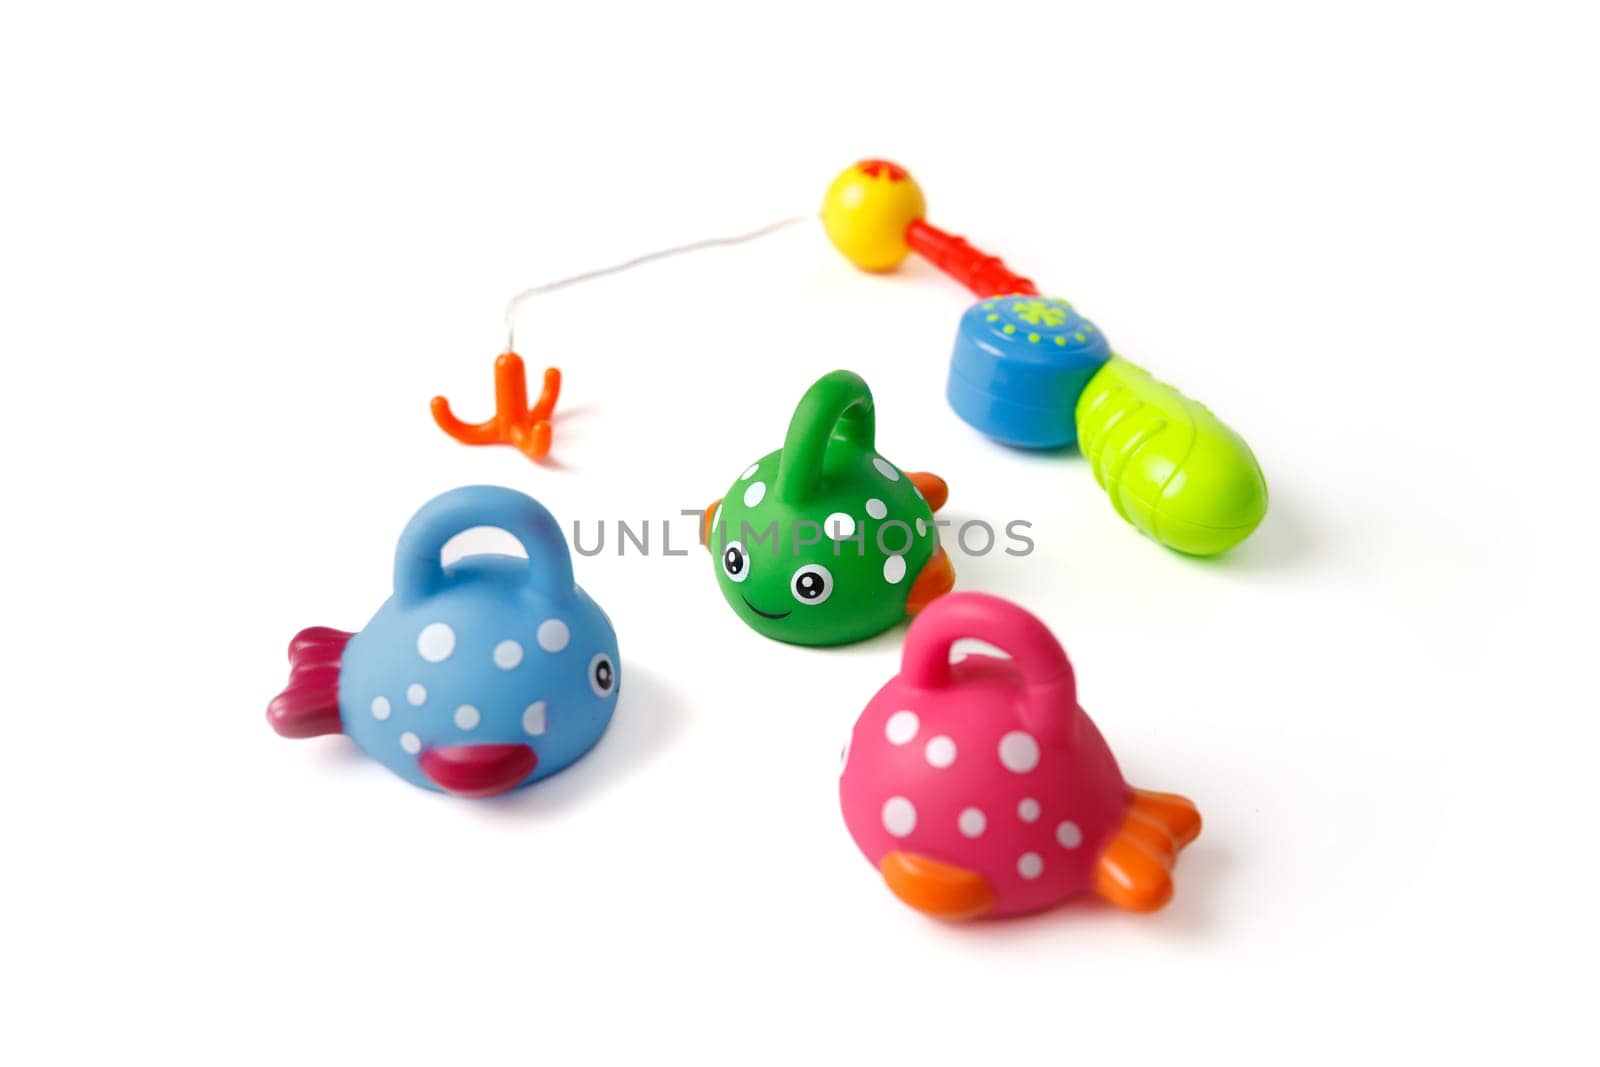 Children's set of fishing toys with cute fish and fishing rod on a white background.